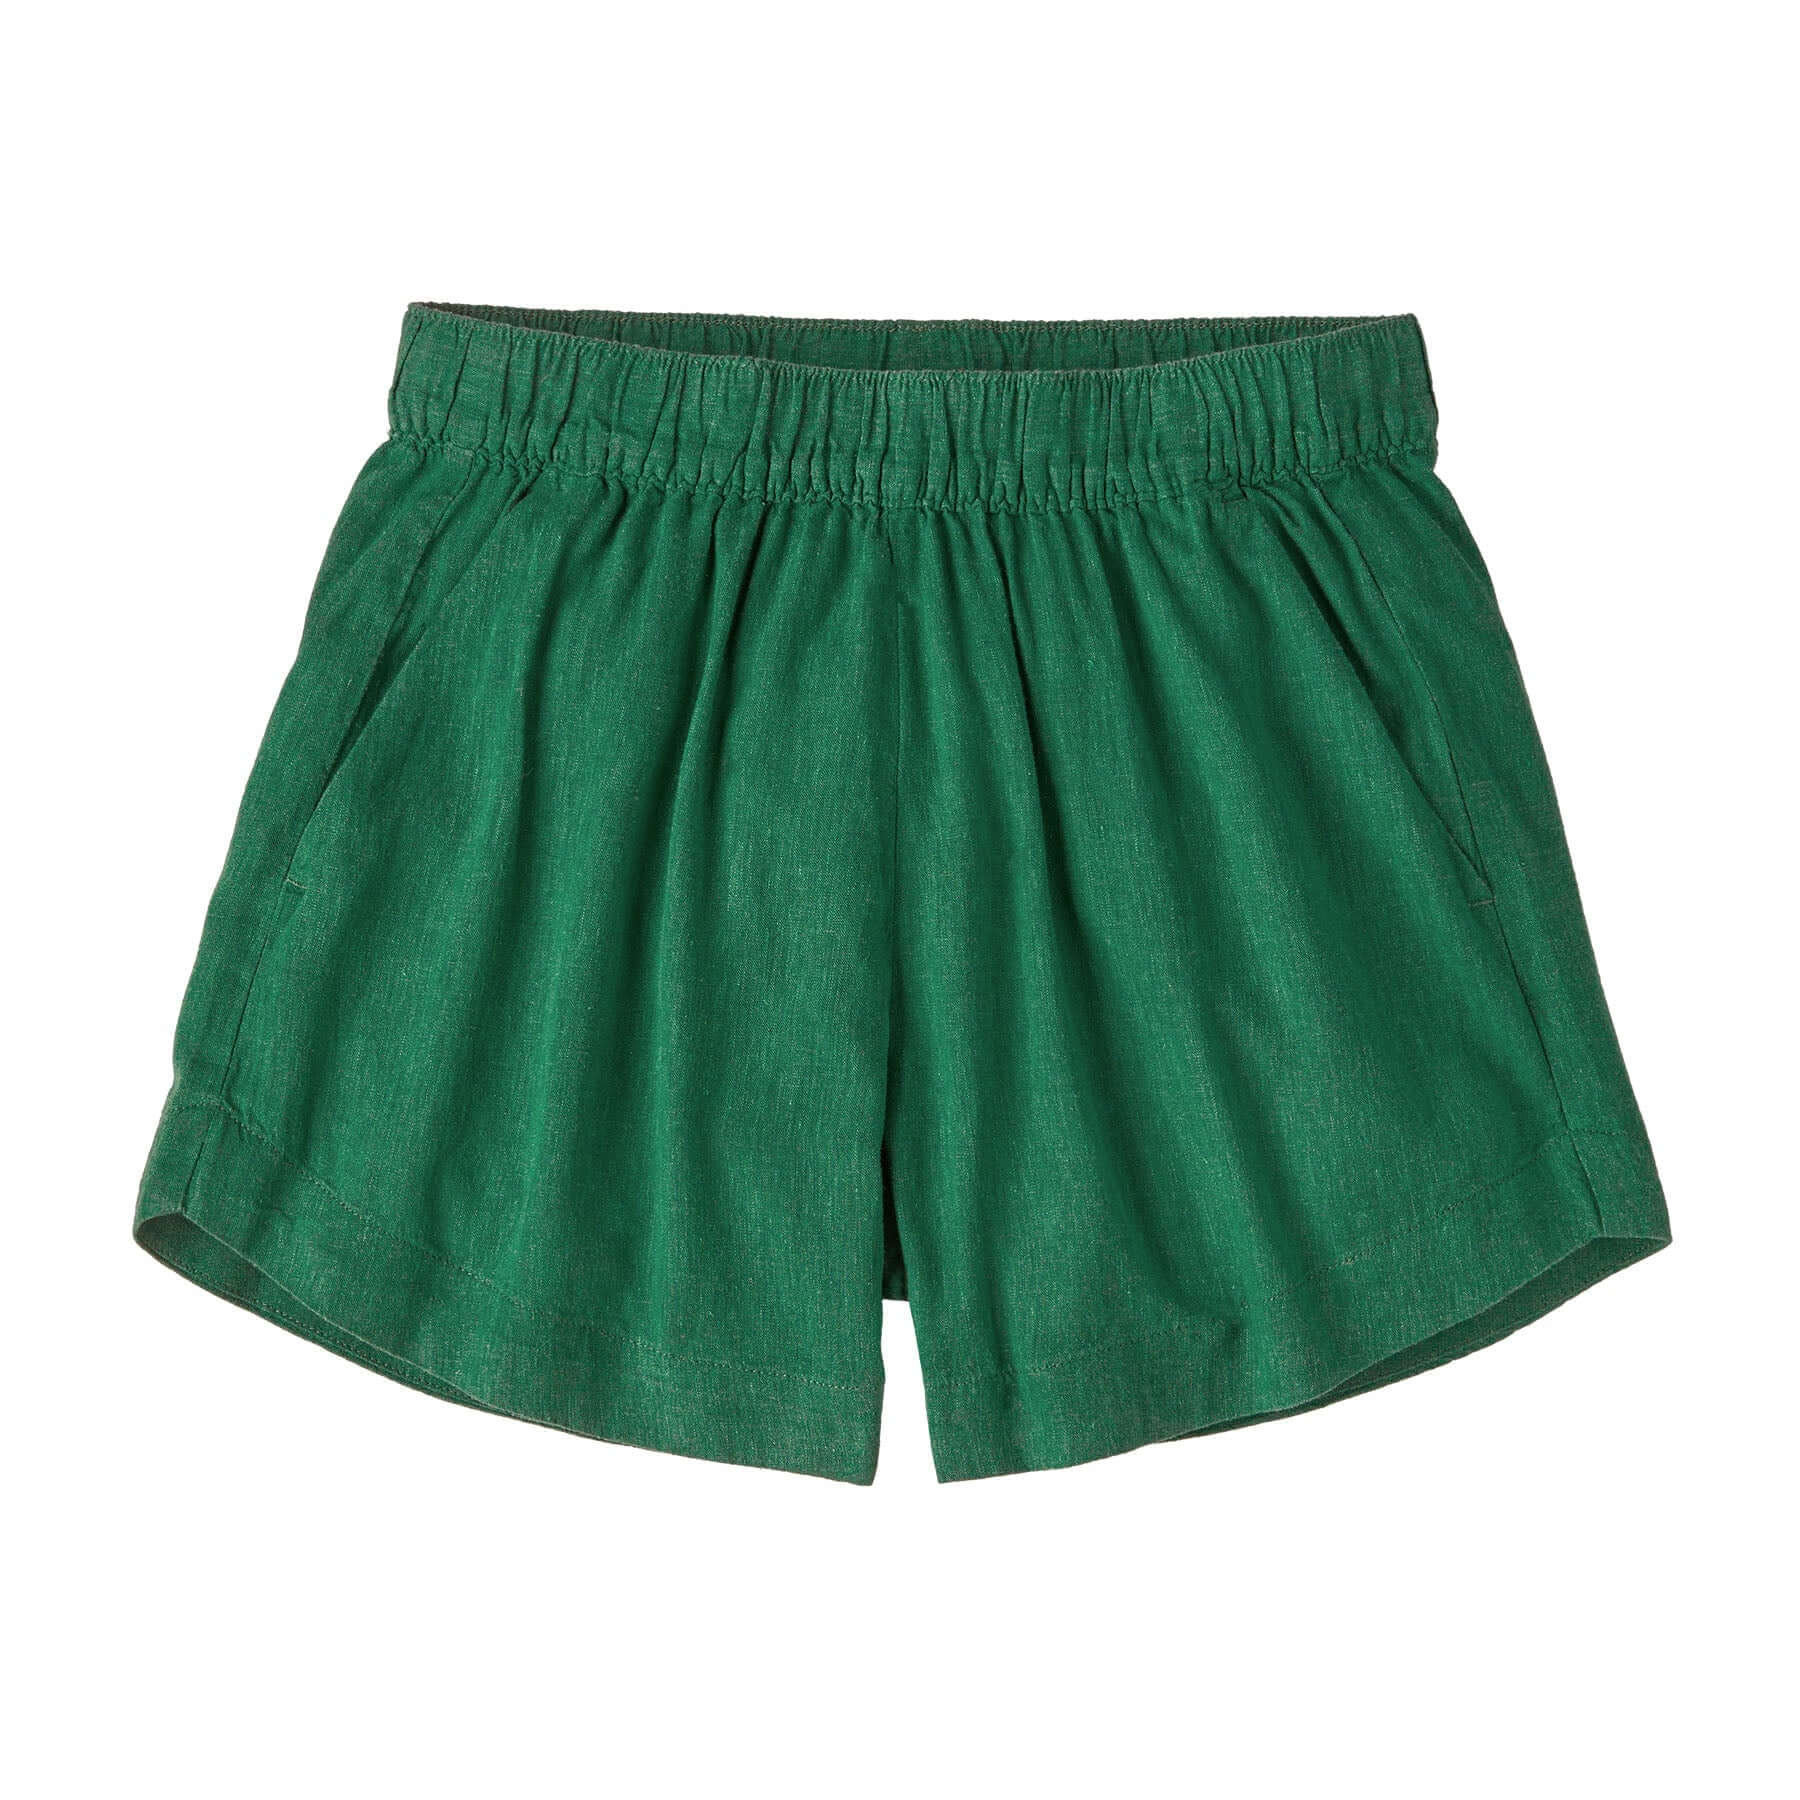 Women's Garden Island Shorts in Whole Weave: Conifer Green | Patagonia Bend